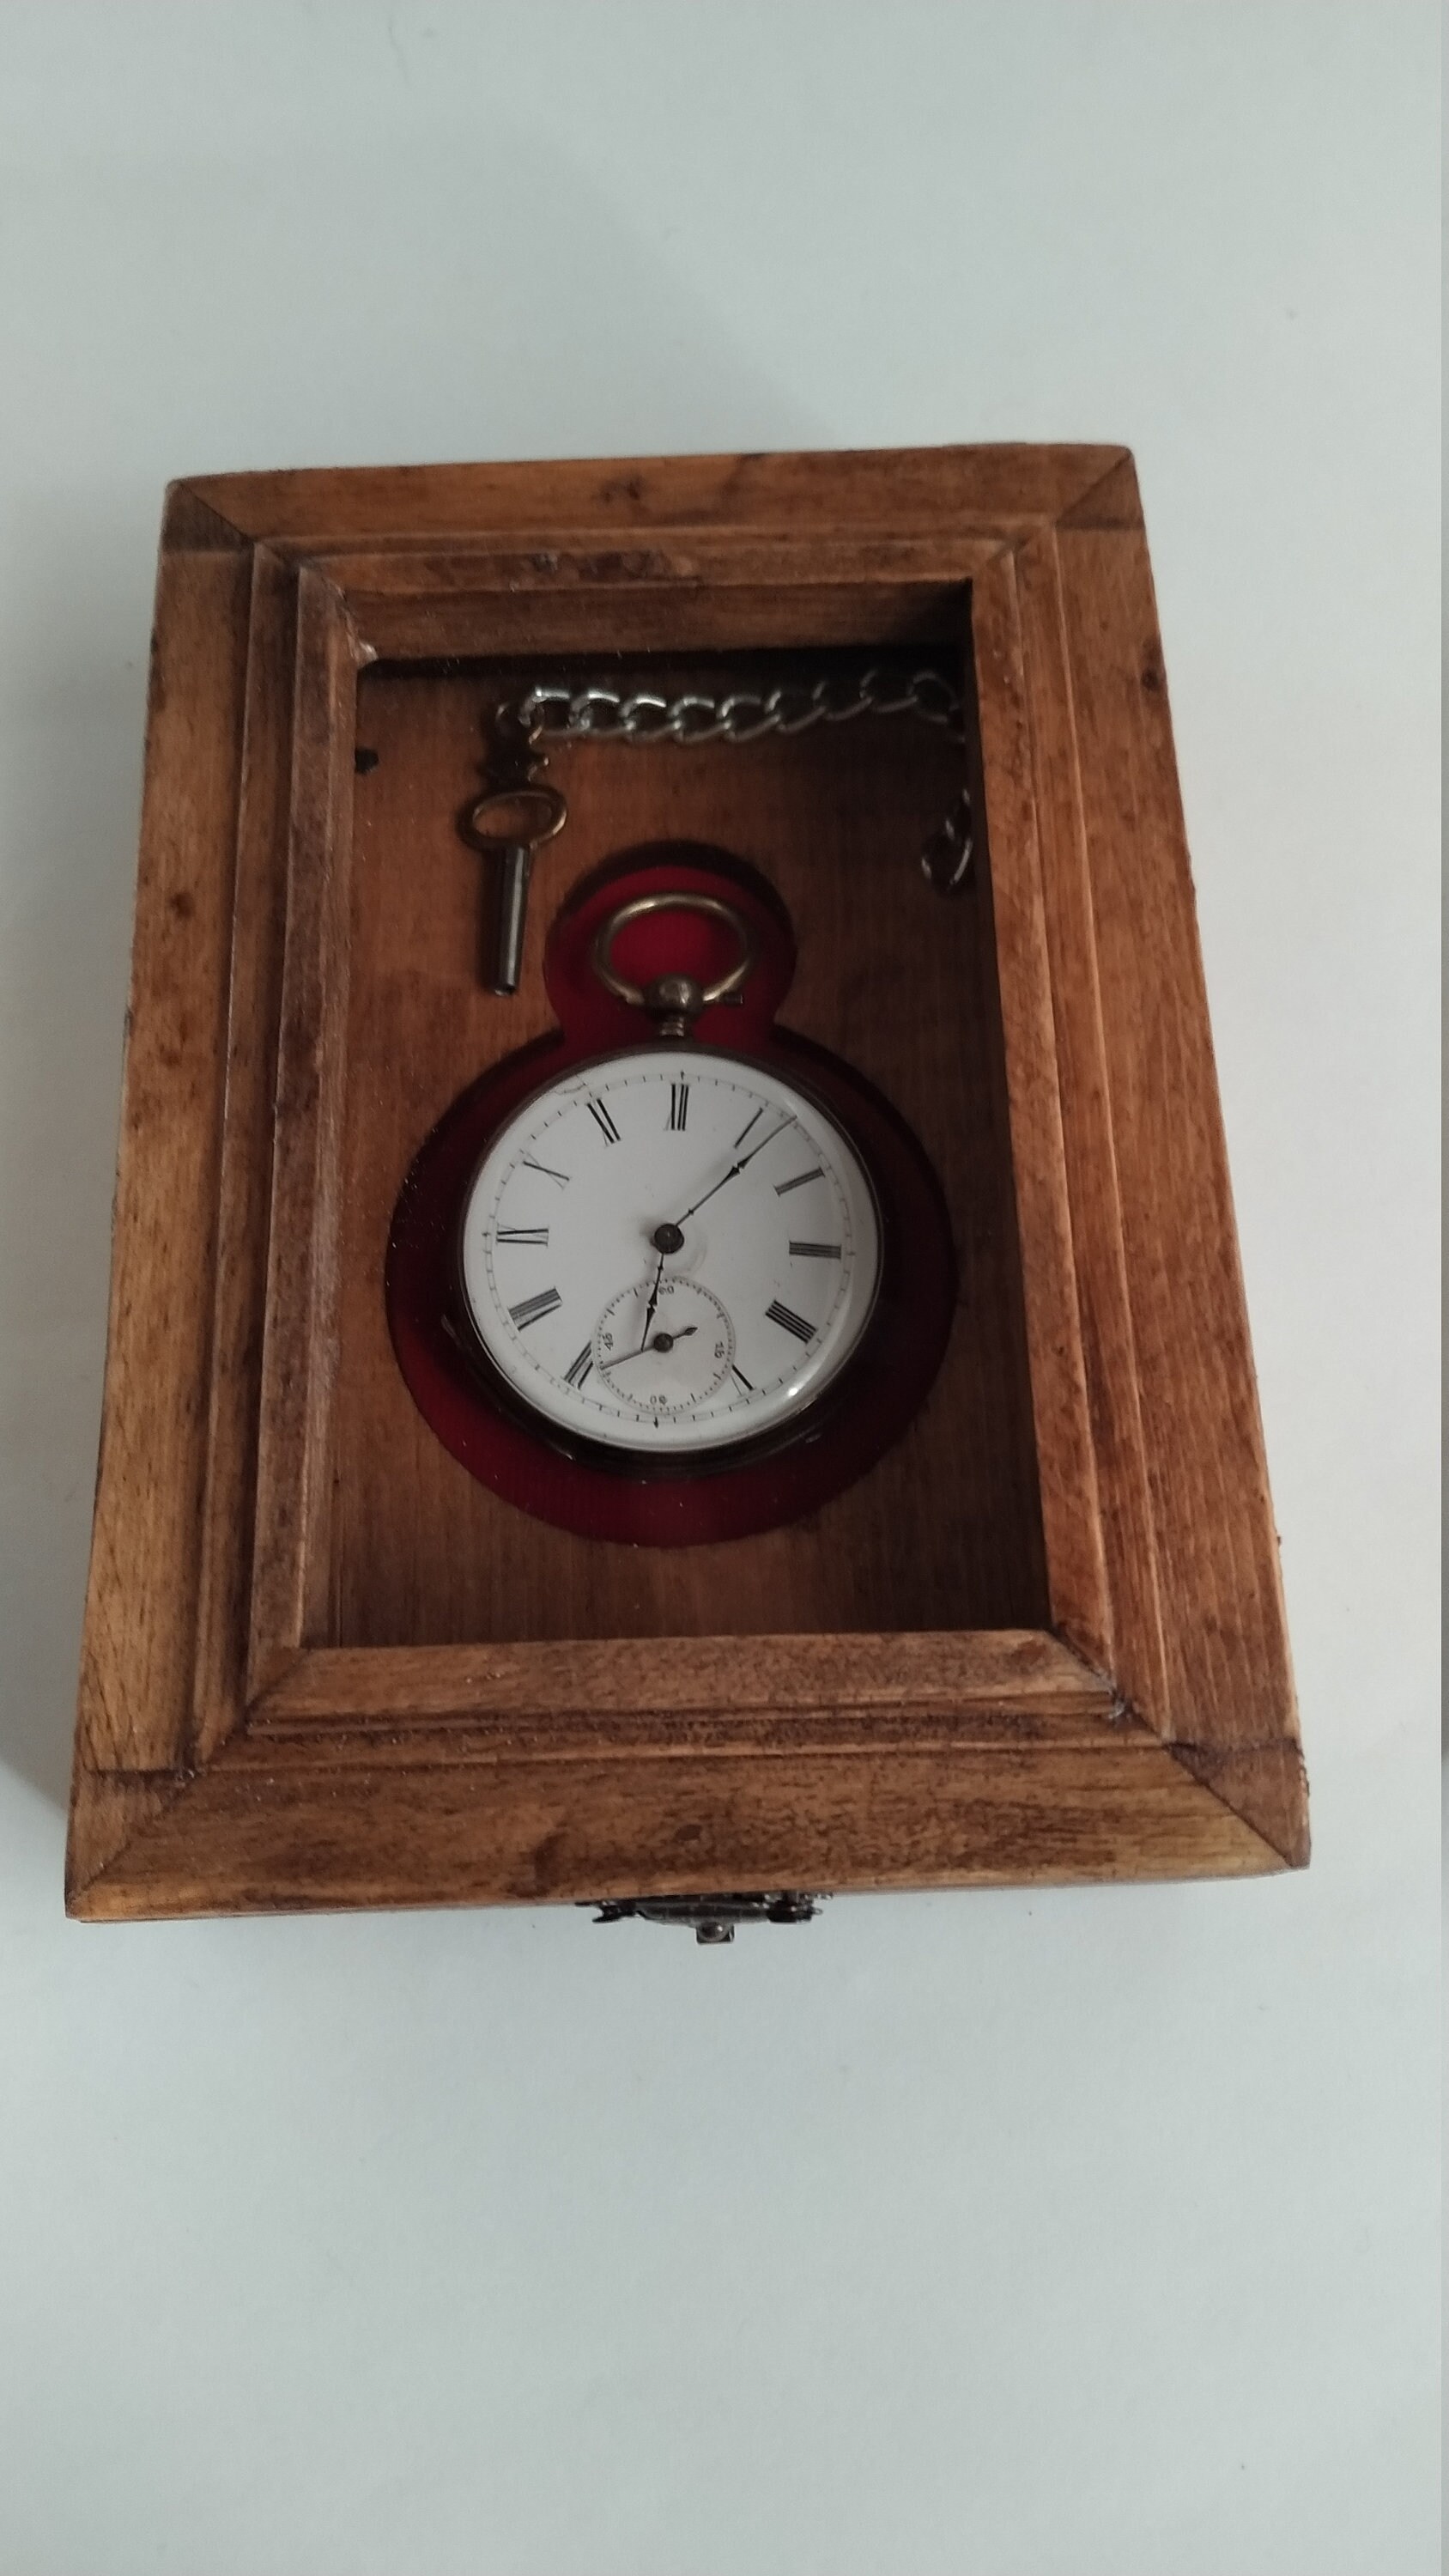 Antiqued Brass Pocket Watch with 3-1/4 Wooden Box- Antique Vintage Style.  Pull knob on watch up to stop watch from running. Back panel can be screwed  off to replace battery. - Schooner